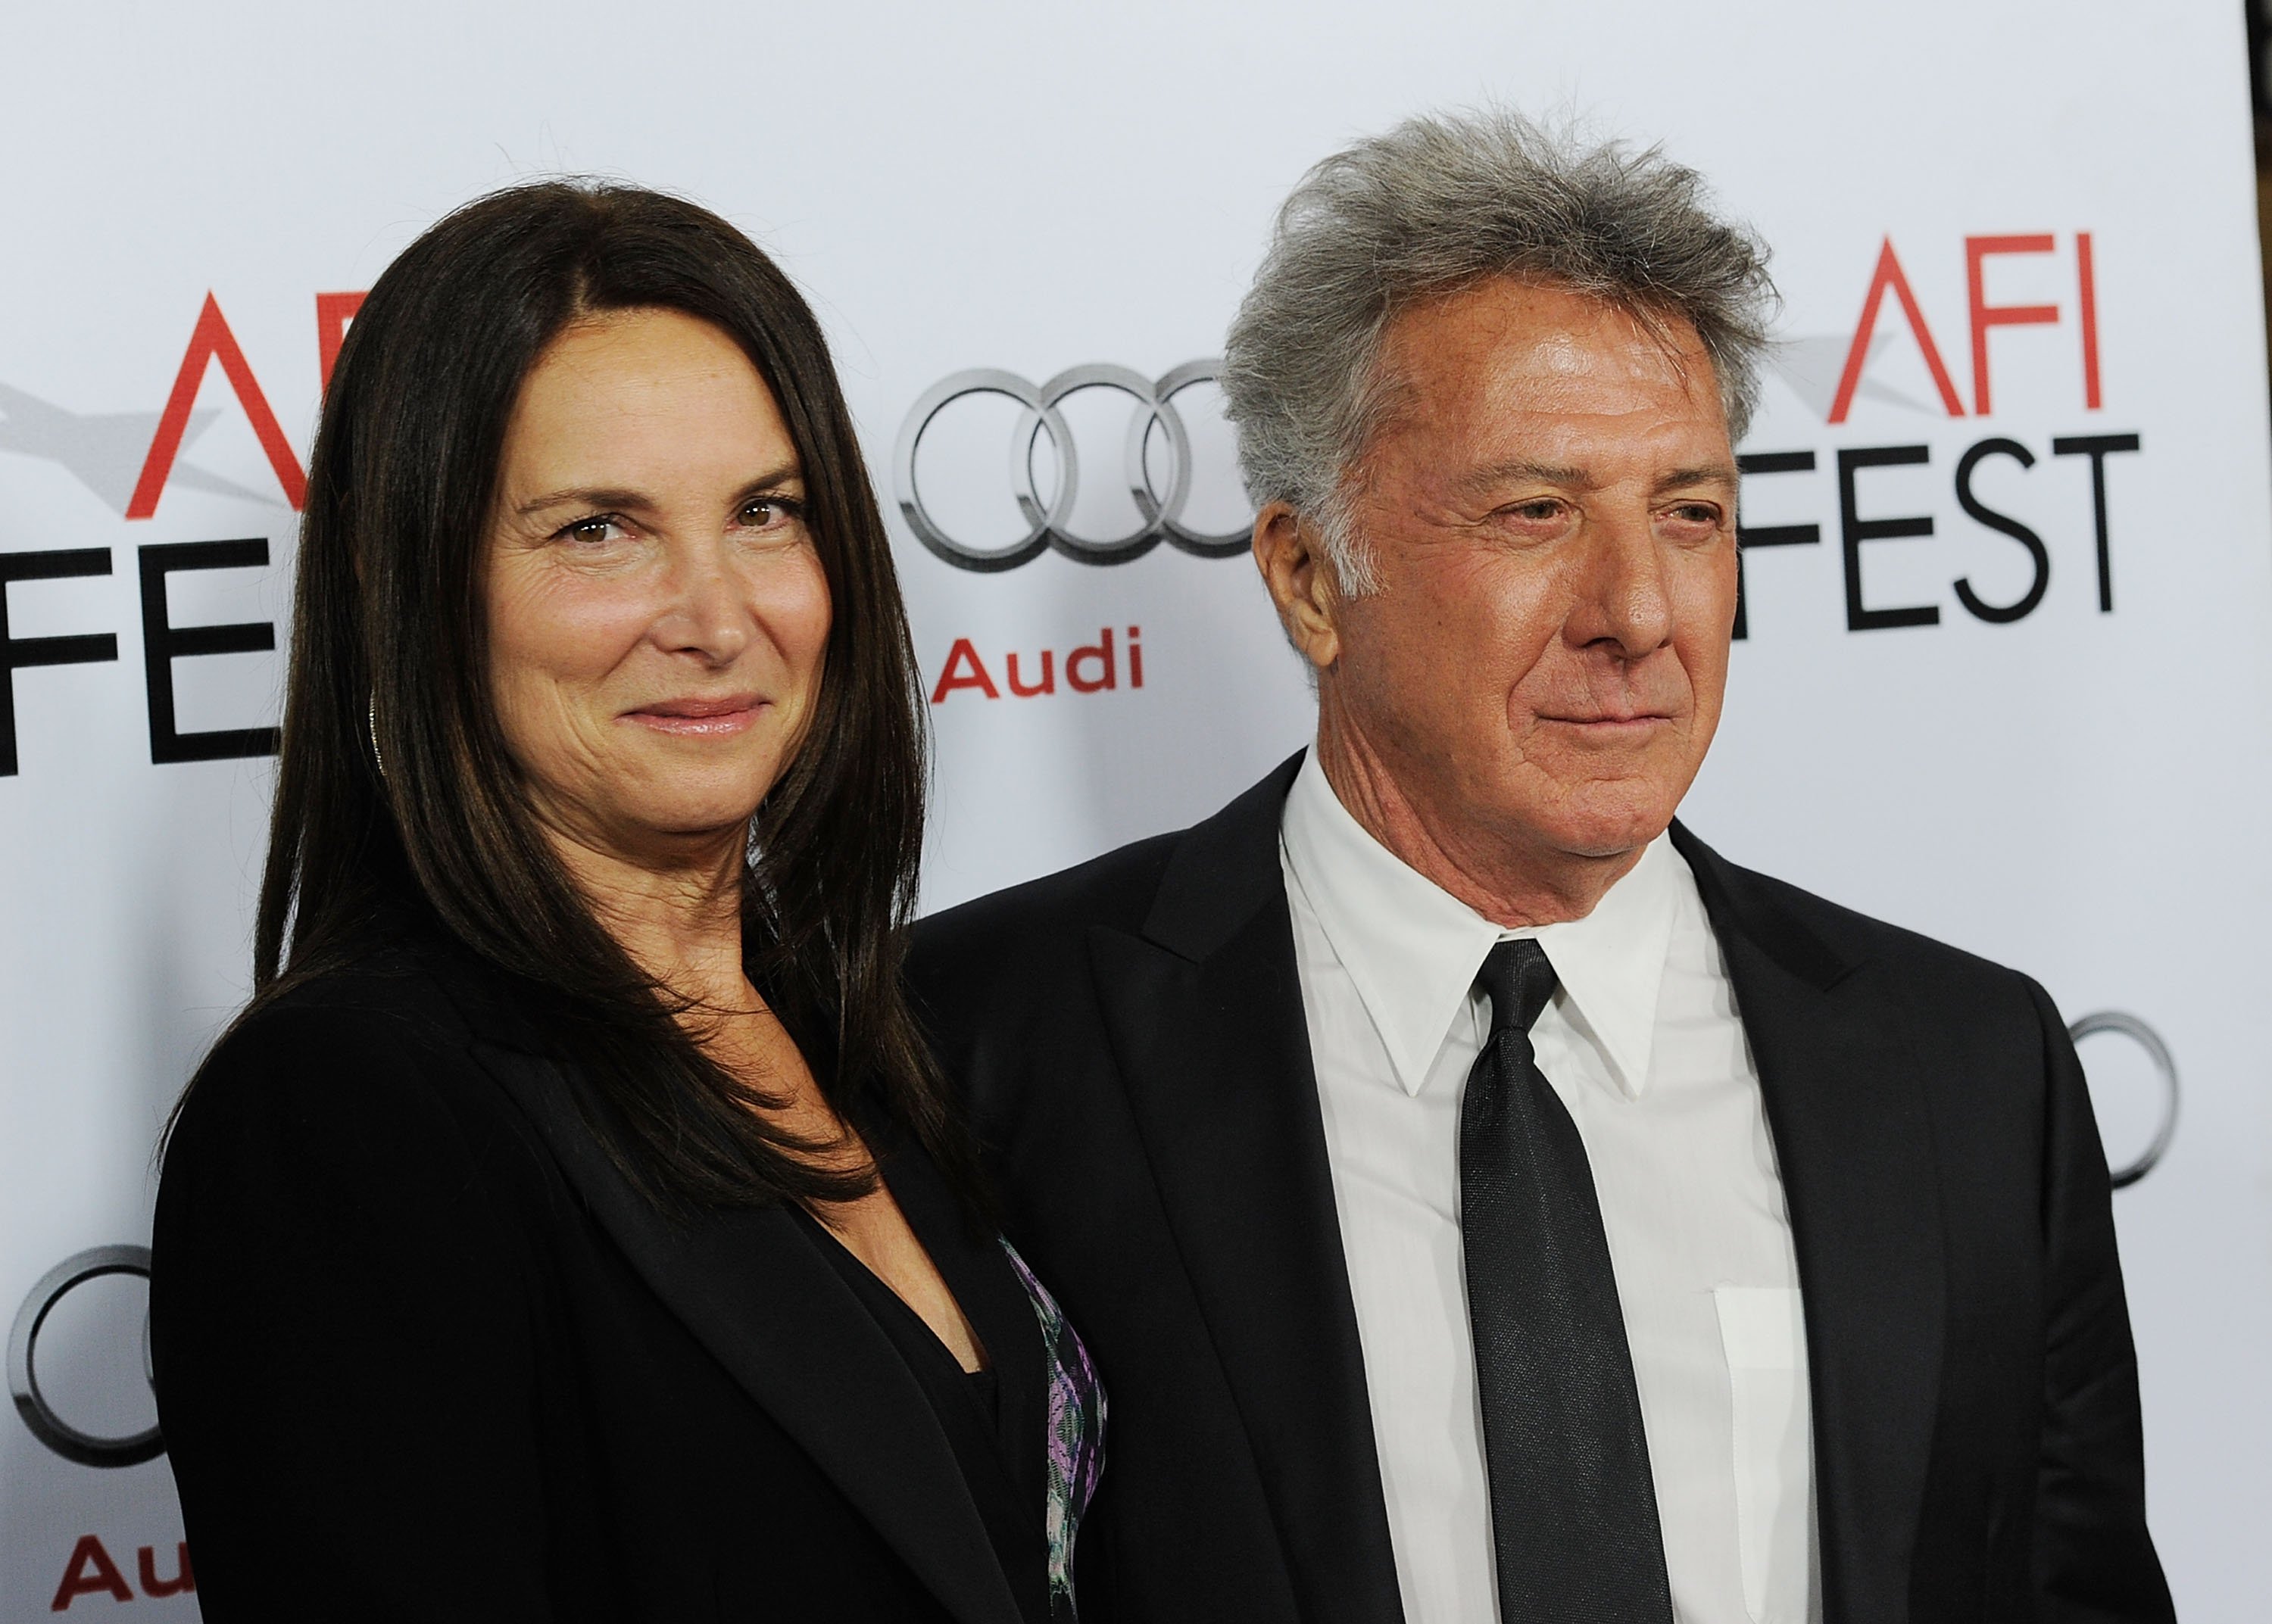 Dustin Hoffman and Wife Lisa Gottsegen arrive at "Barney's Version" screening during AFI FEST 2010 at Egyptian Theatre on November 6, 2010 in Hollywood, California | Photo: Getty Images